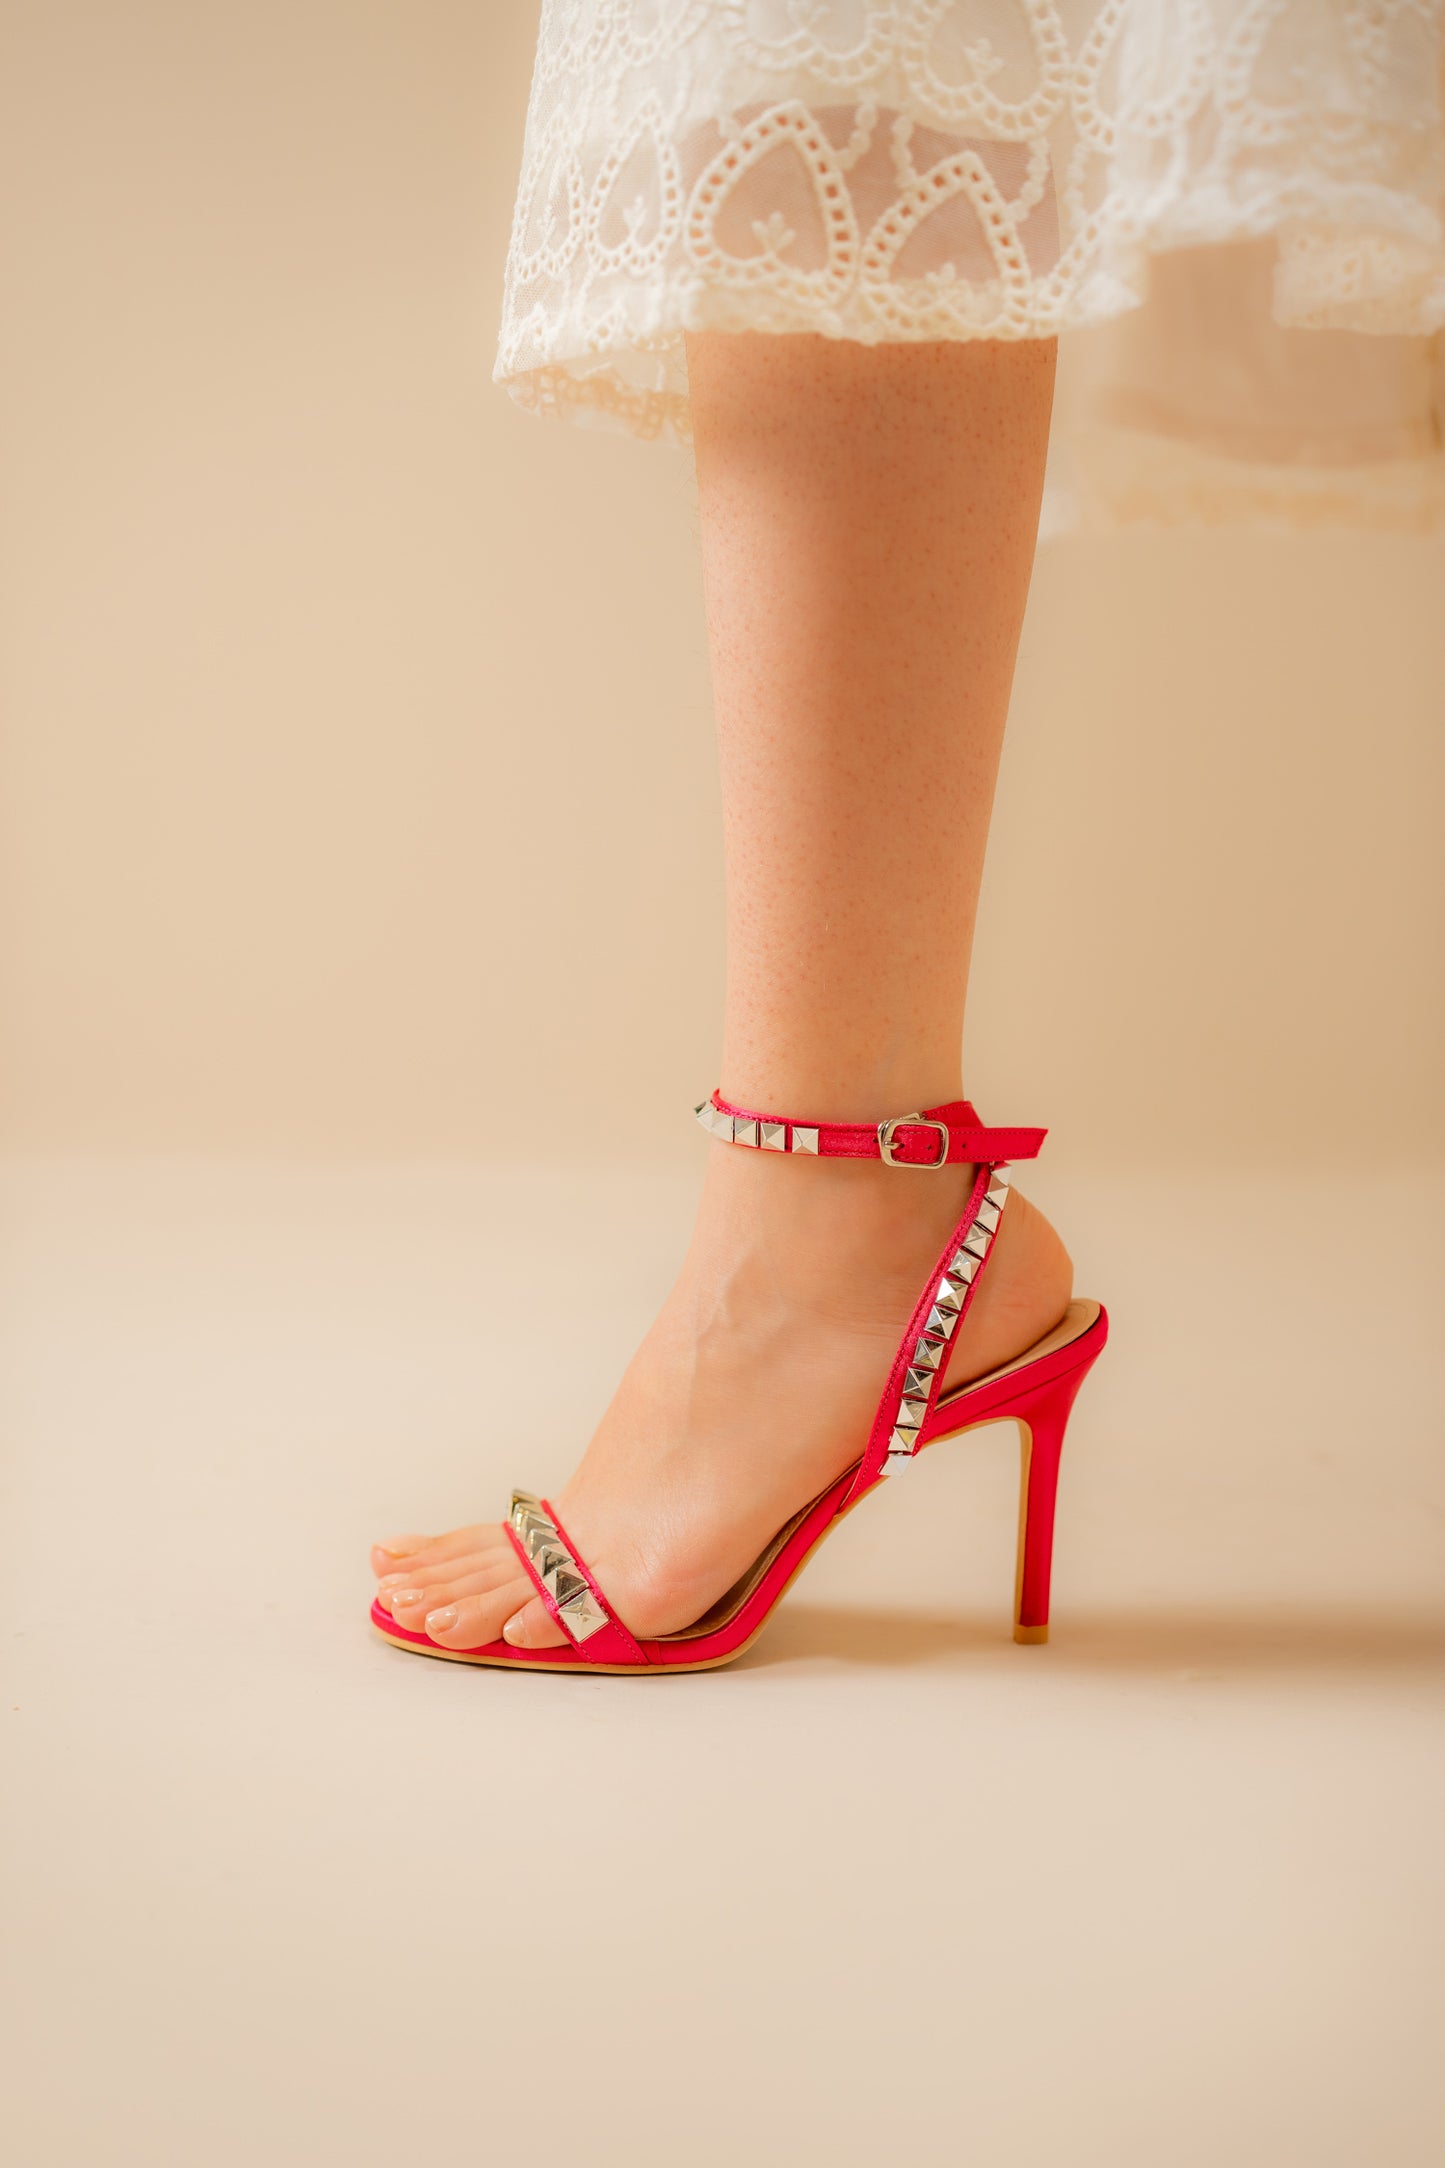 Ankle-cuff studded heels